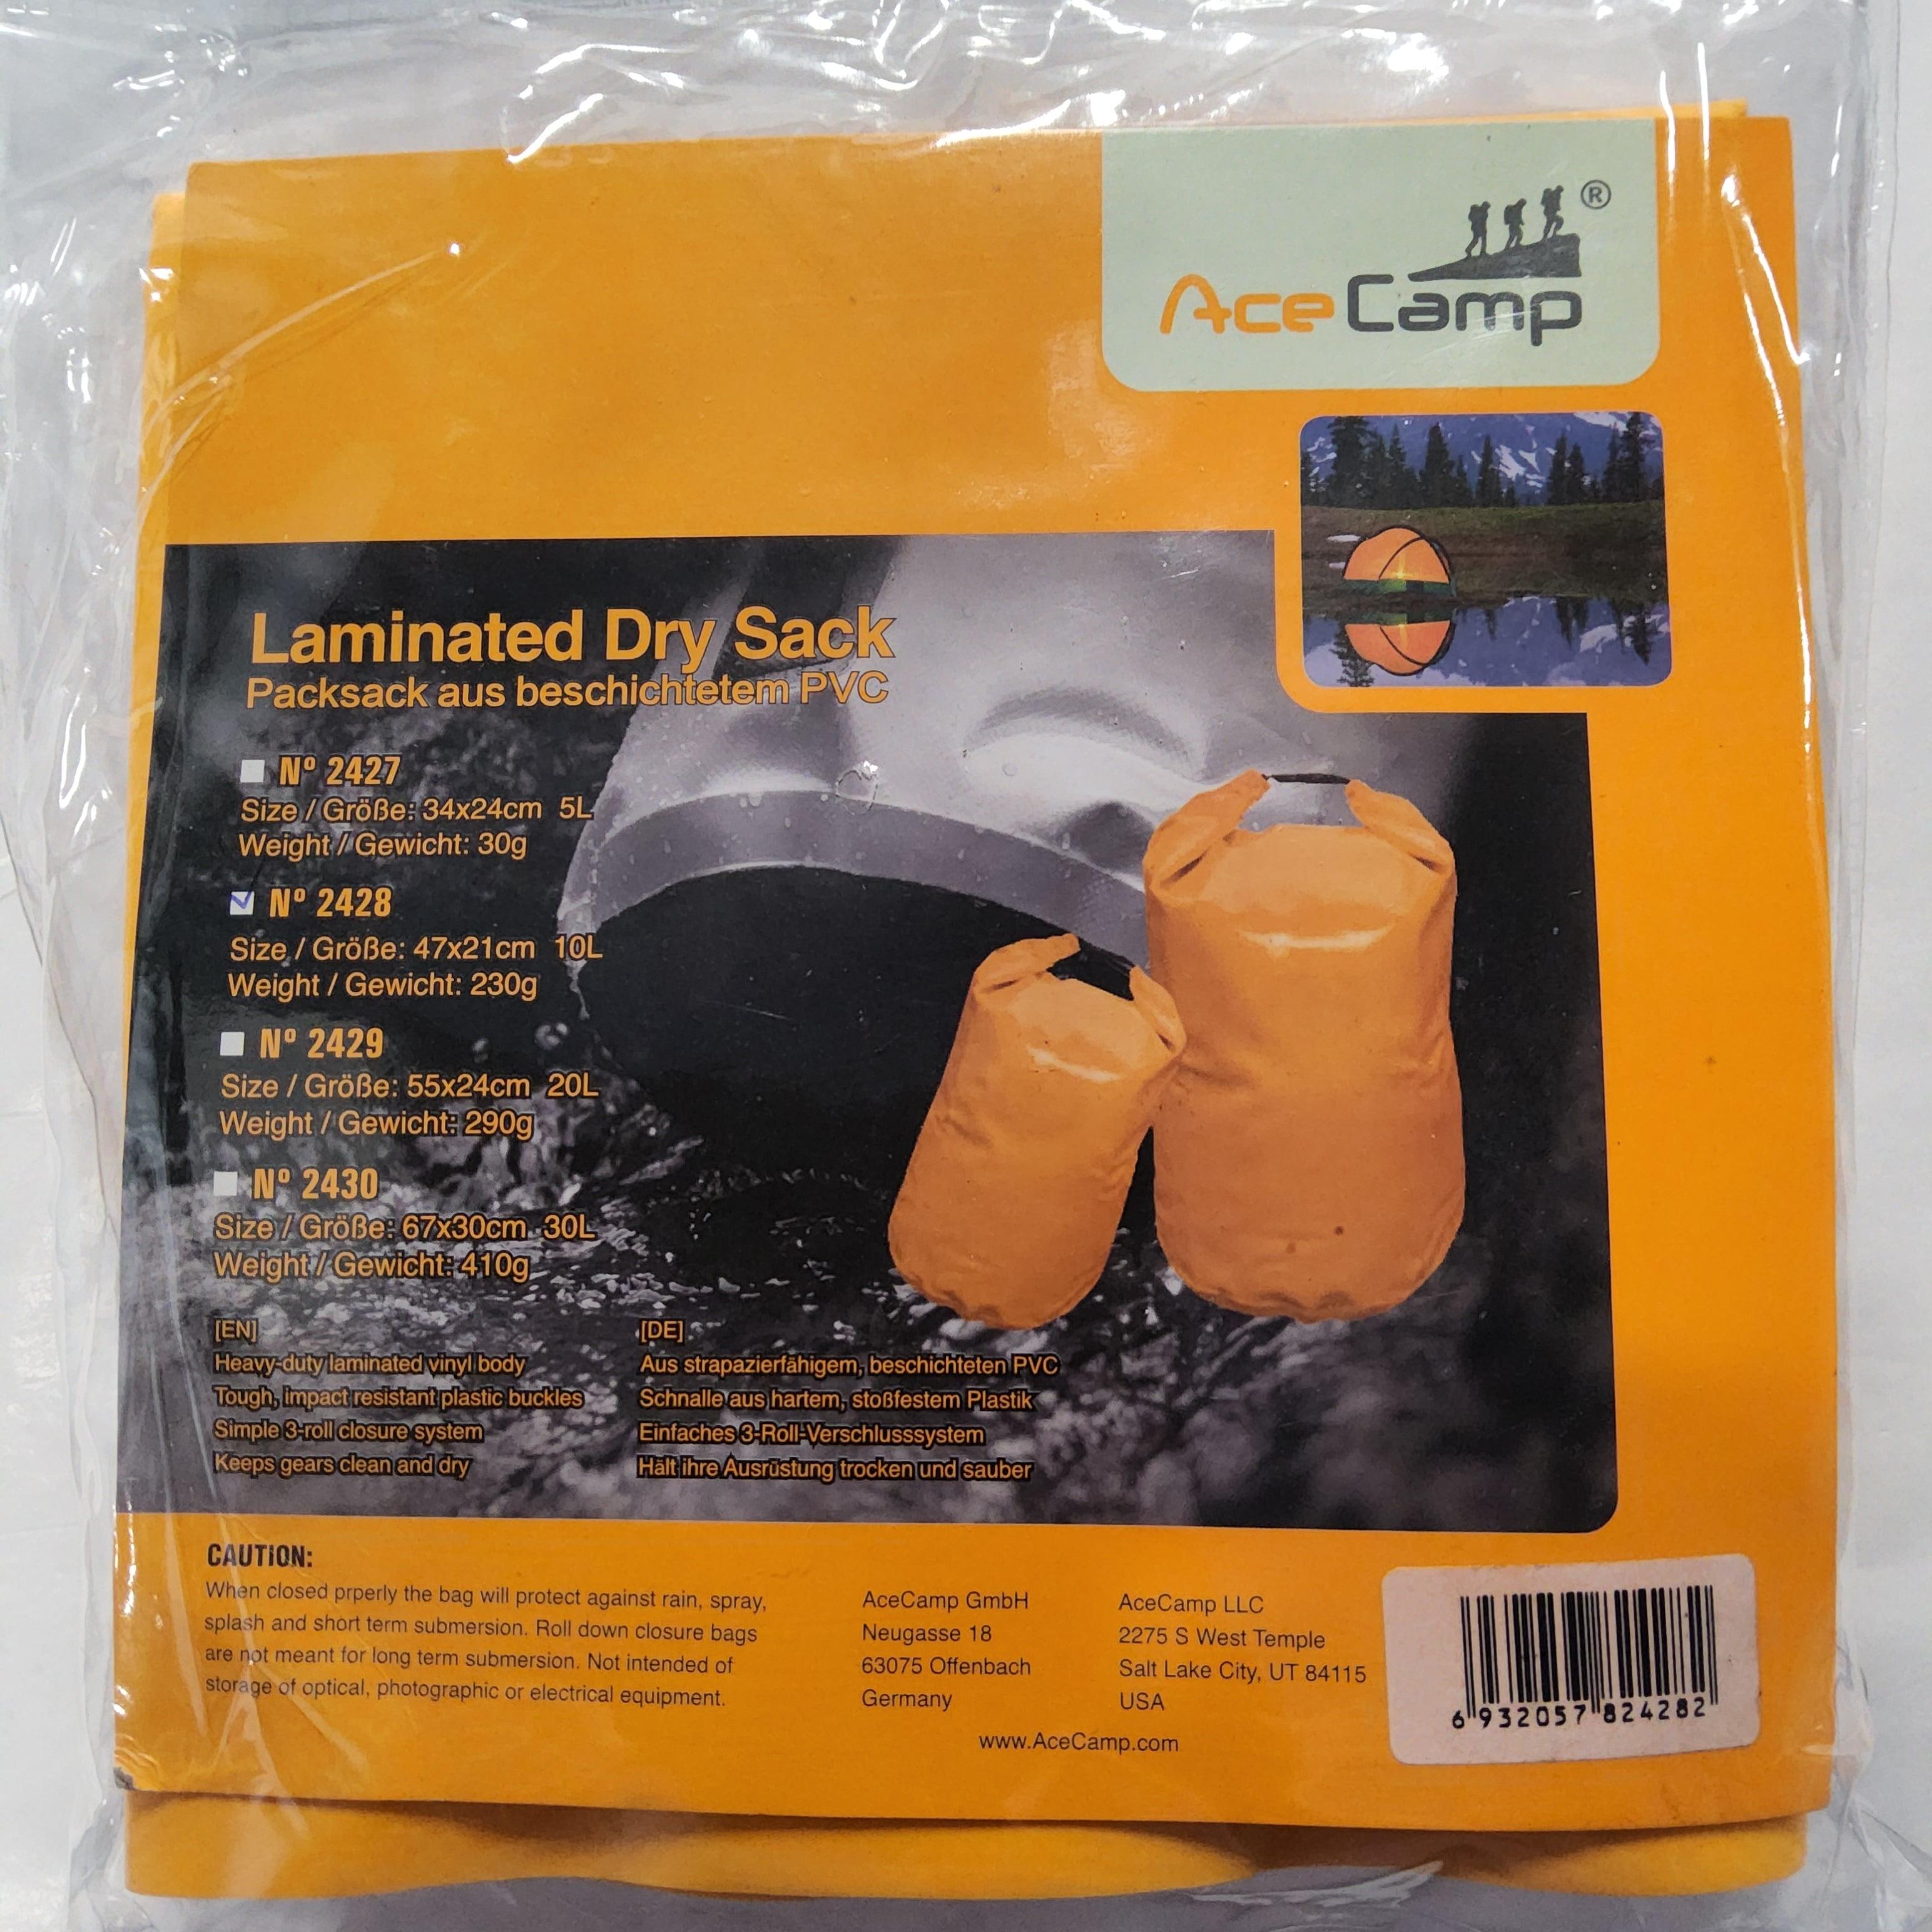 Ace Camp Laminated Dry Sack 10L #2428